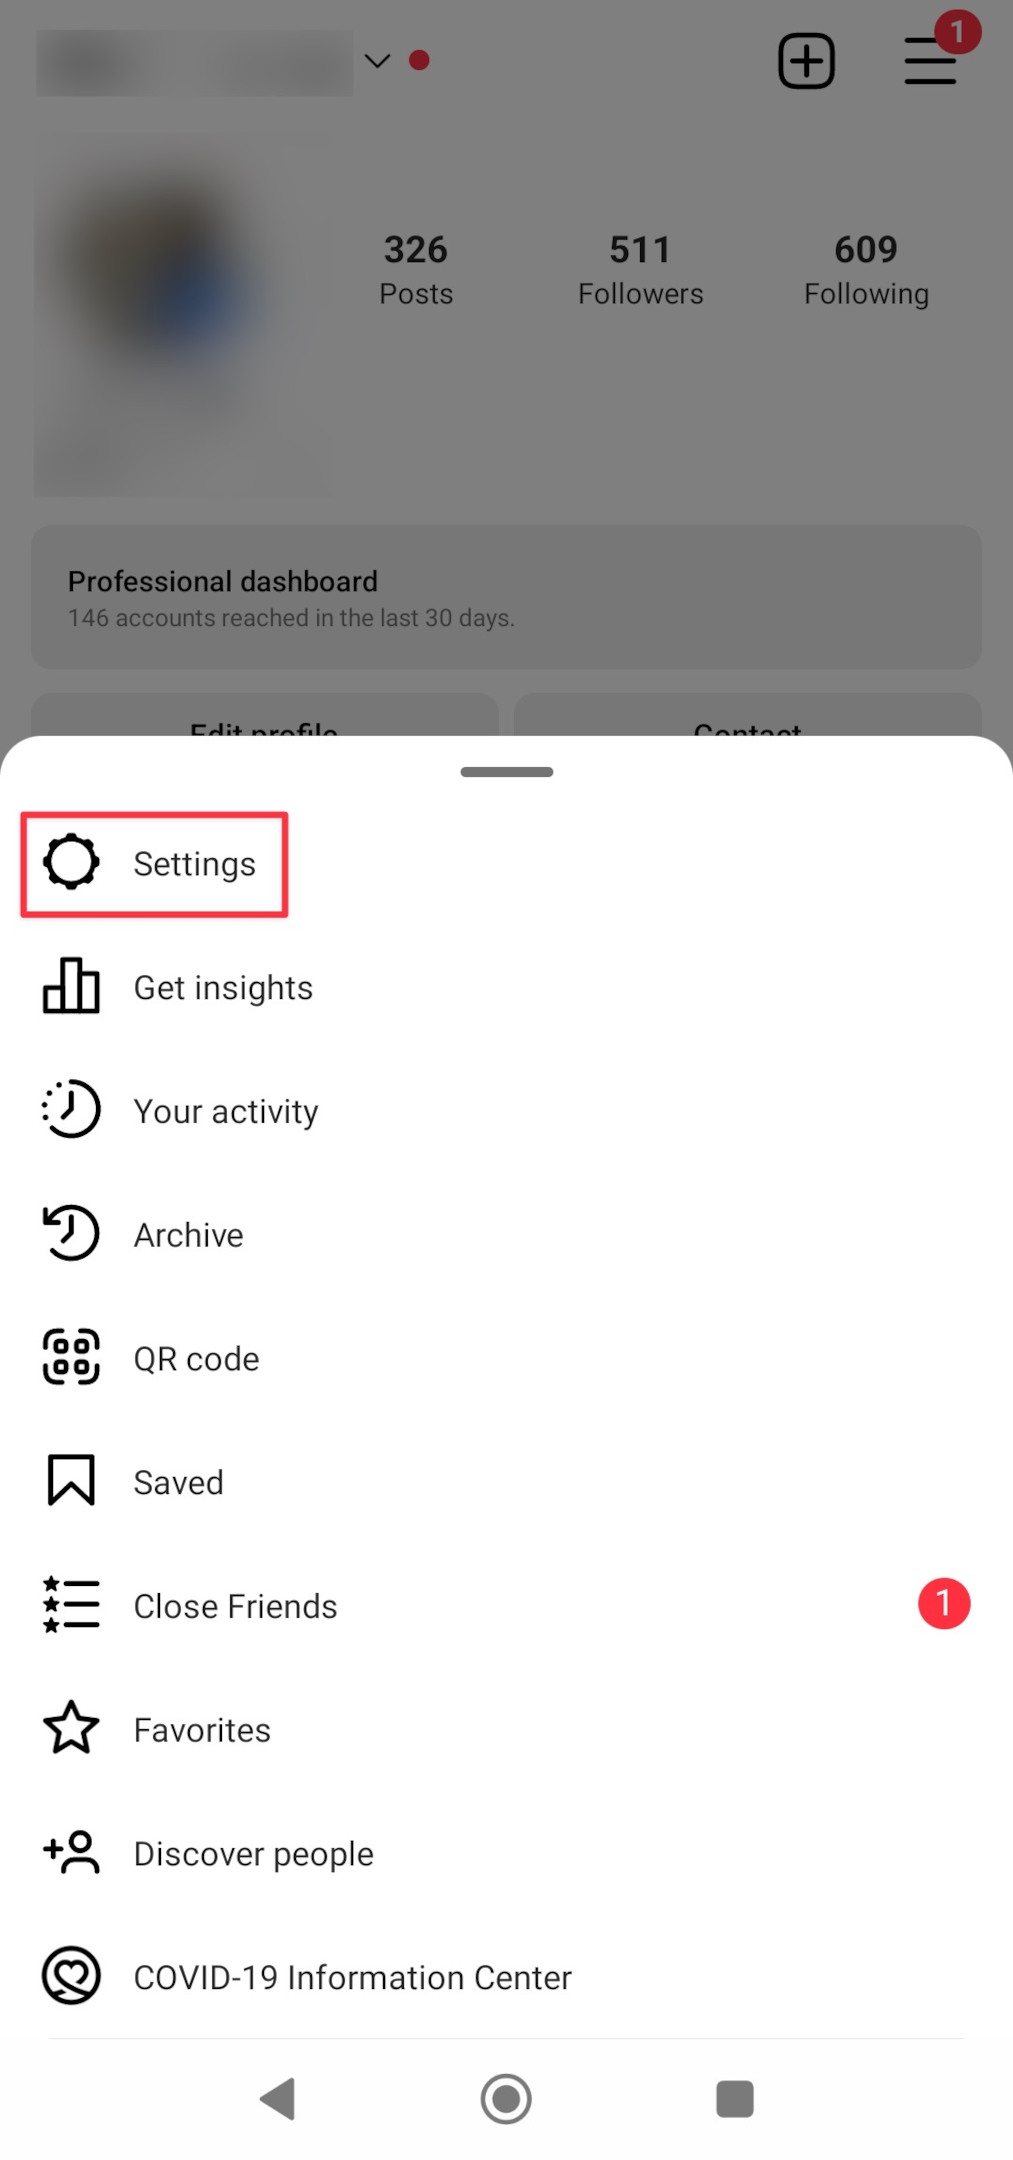 Remote.tools shows settings under Instagram profile